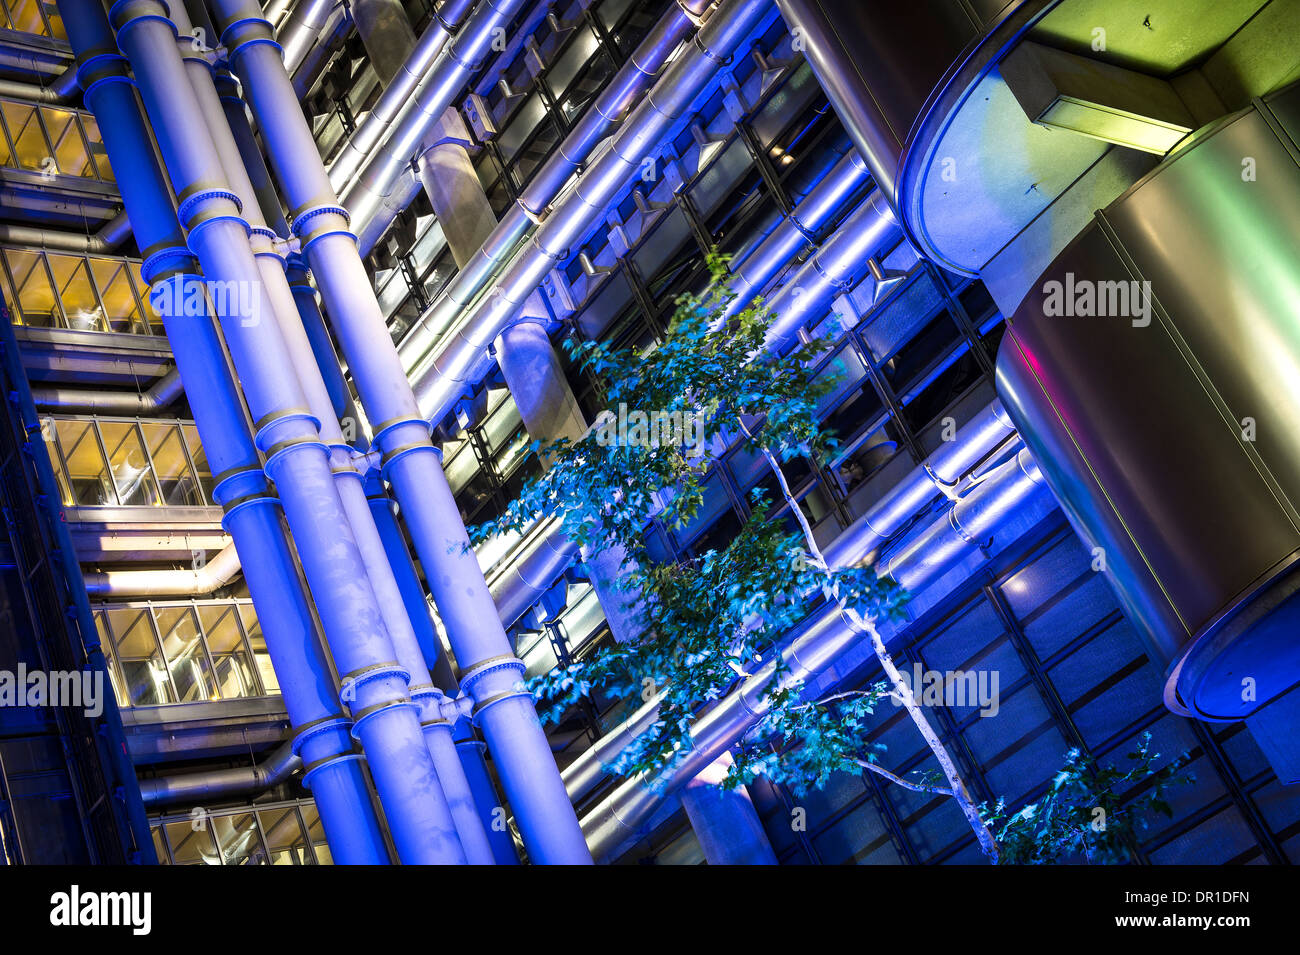 Evening view of the famous Lloyds Building in the City of London, England. Stock Photo